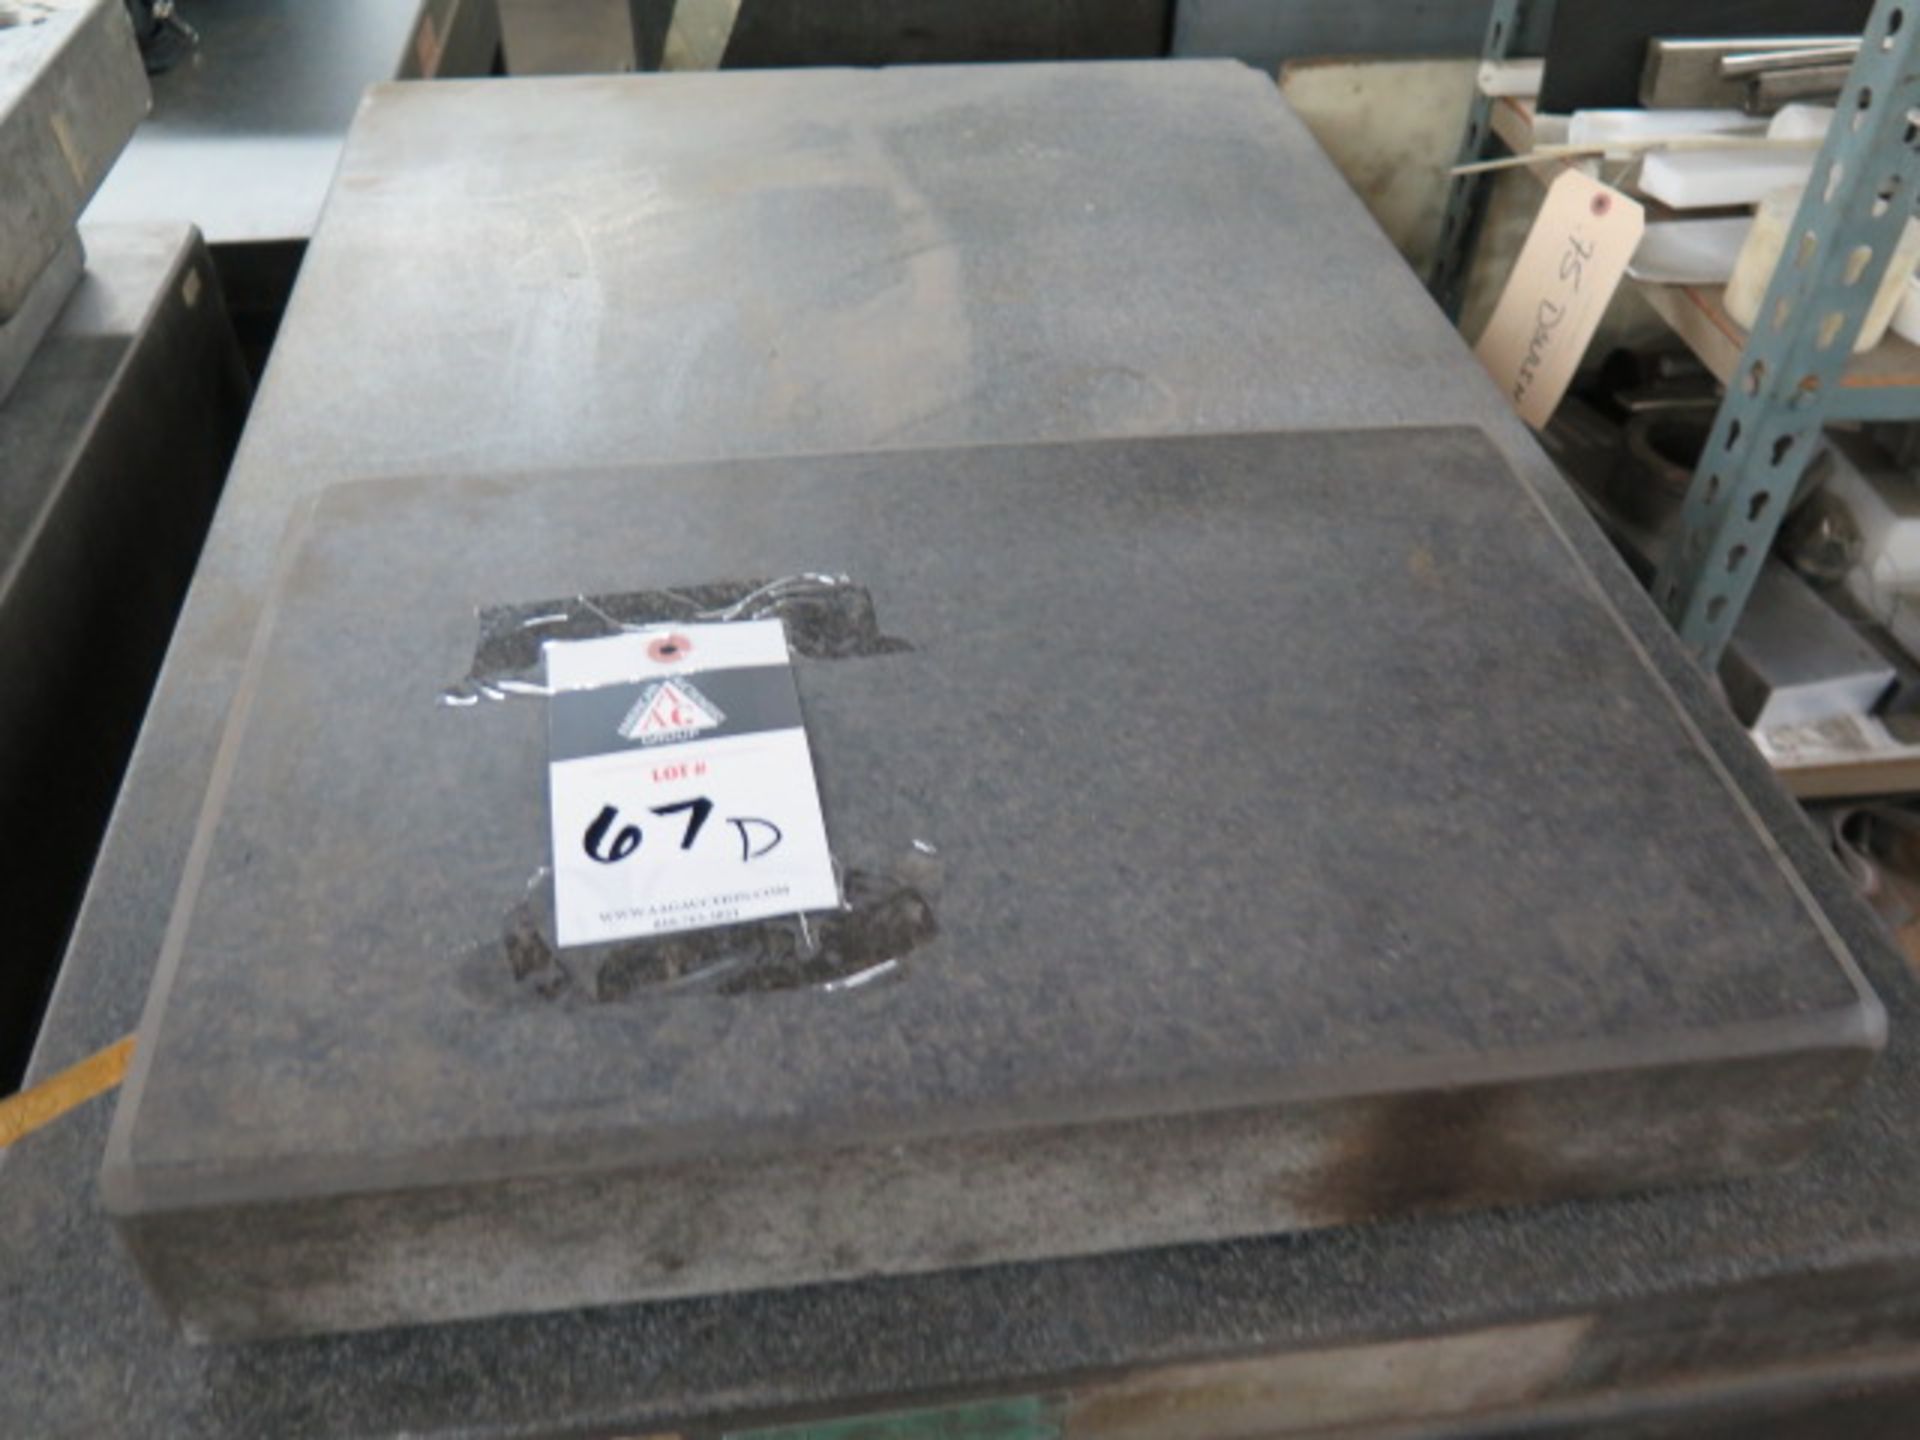 12" x 18" x 3" Granite Surface Plate (SOLD AS-IS - NO WARRANTY) - Image 2 of 4